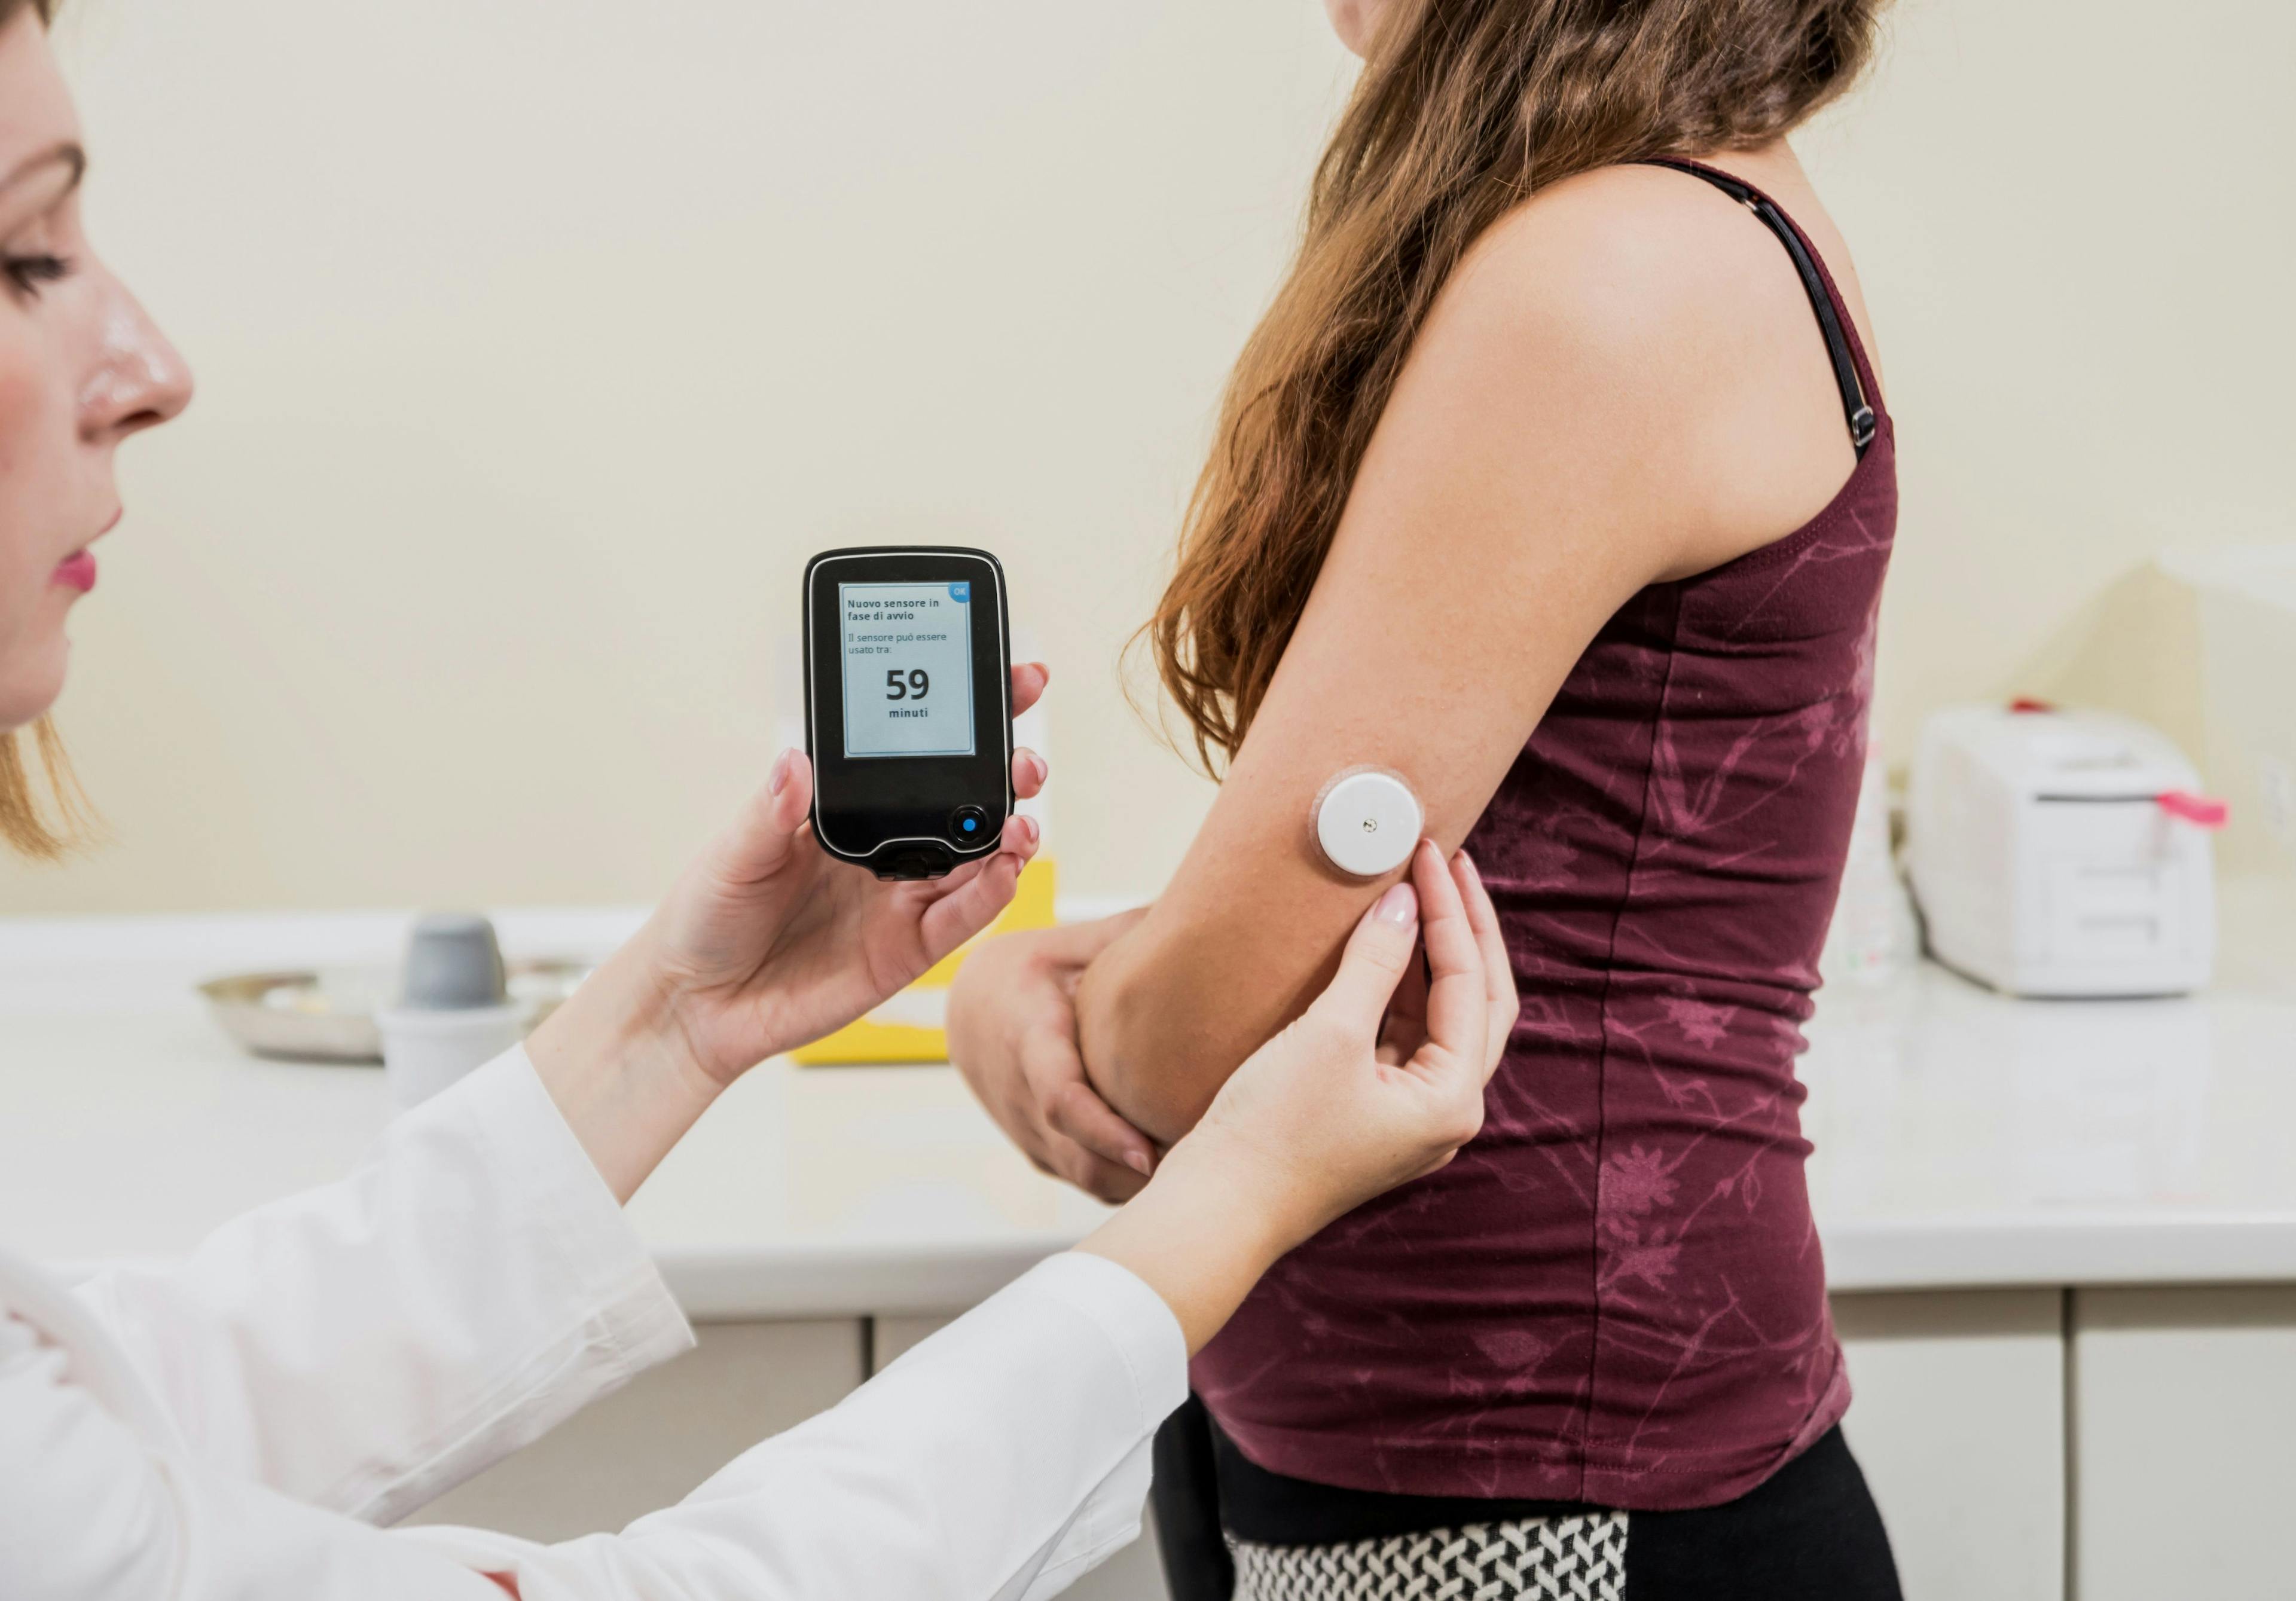 Remote CGM monitoring could help patients control diabetes / romaset - stock.adobe.com